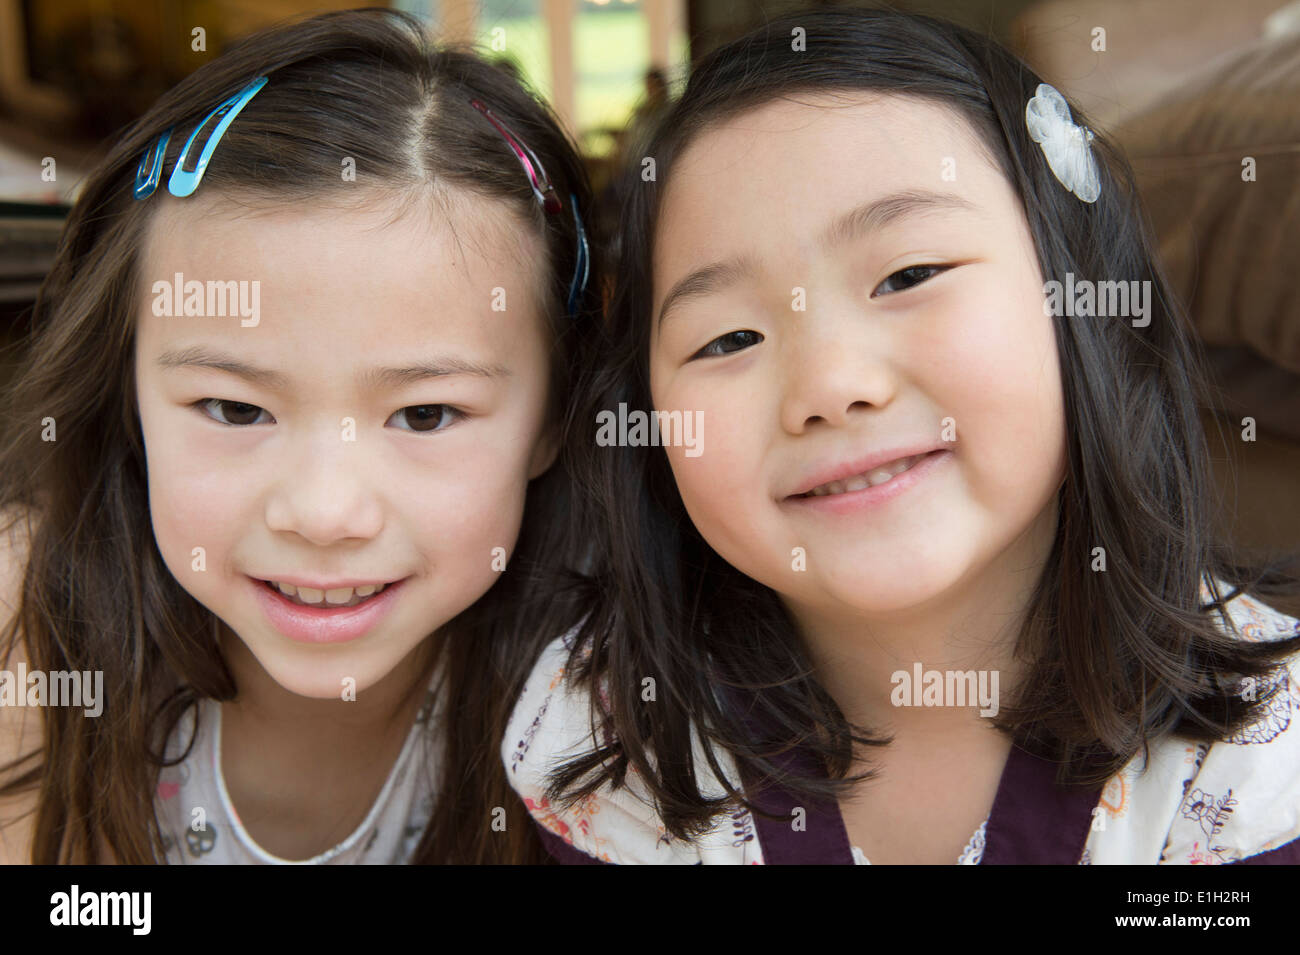 Portrait of two young girls Stock Photo